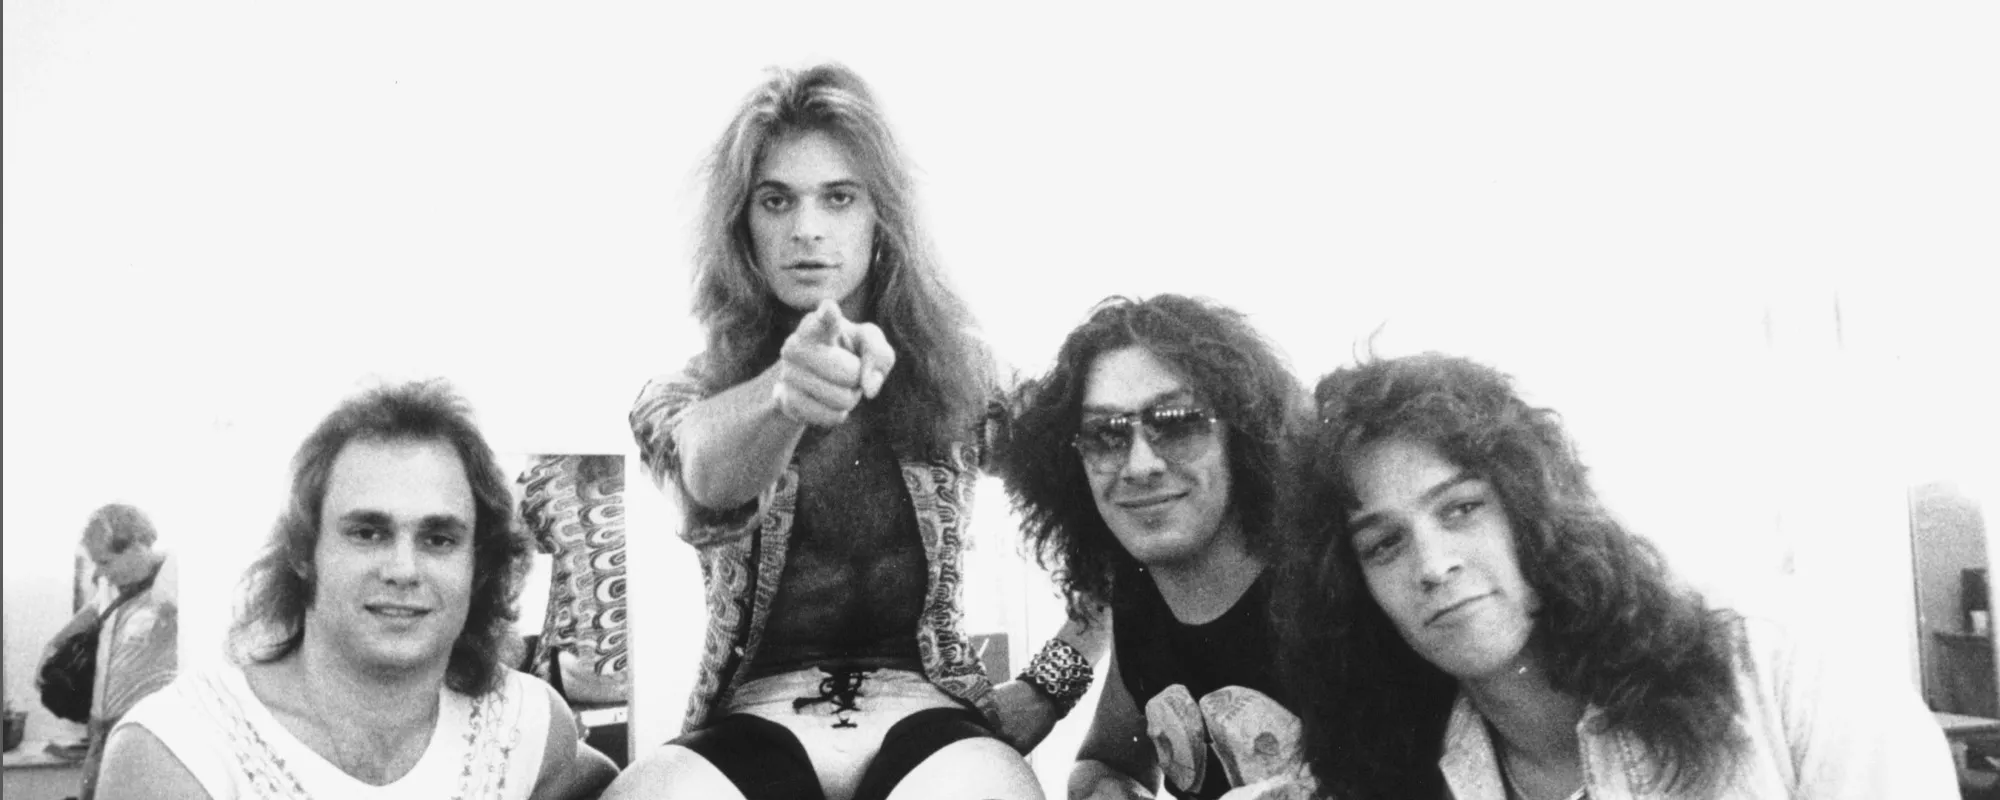 Behind the Band Name: Why David Lee Roth Is Responsible for Van Halen